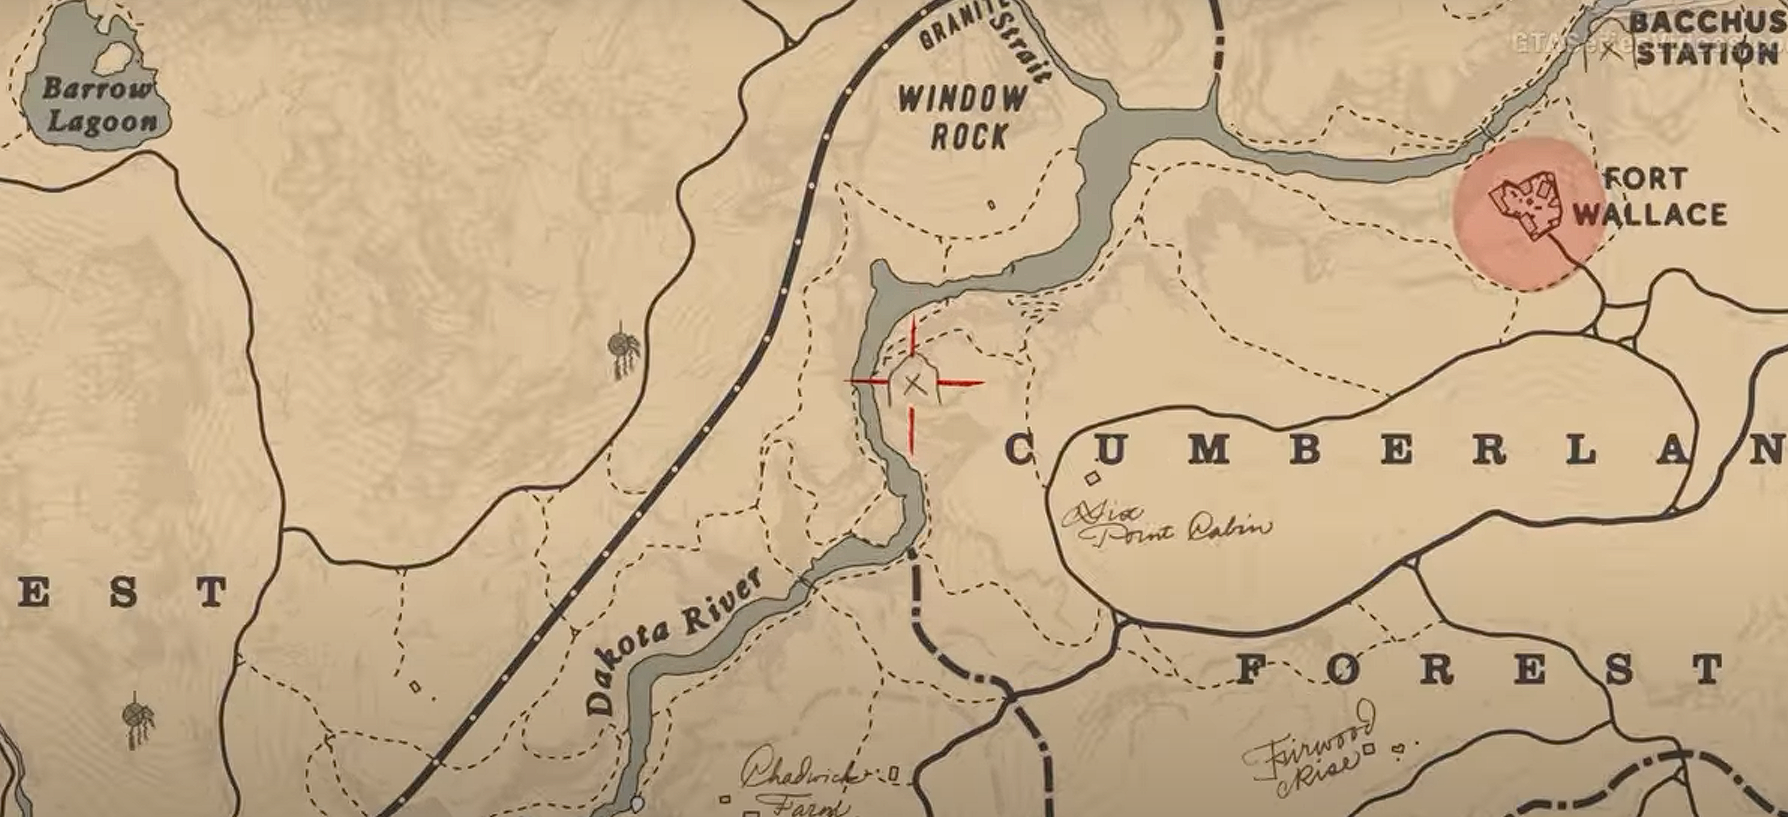 Red Dead Redemption 2 | Six Point Cabin | Source: GTA Series Videos